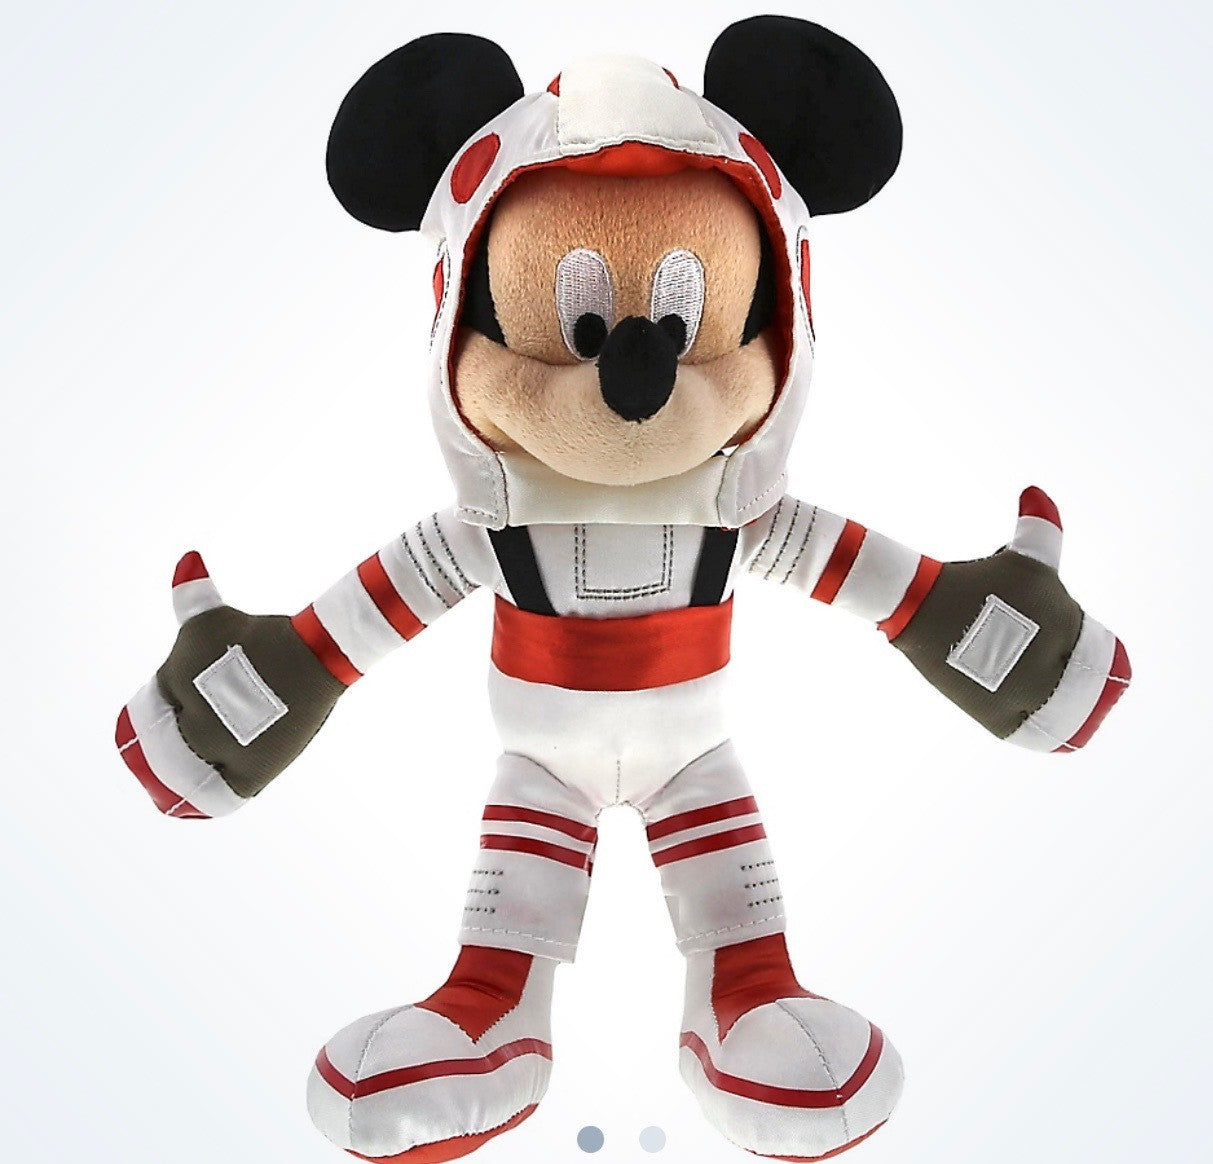 Disney Parks Mickey Mouse 9" Mission Space Astronaut Plush New With Tags